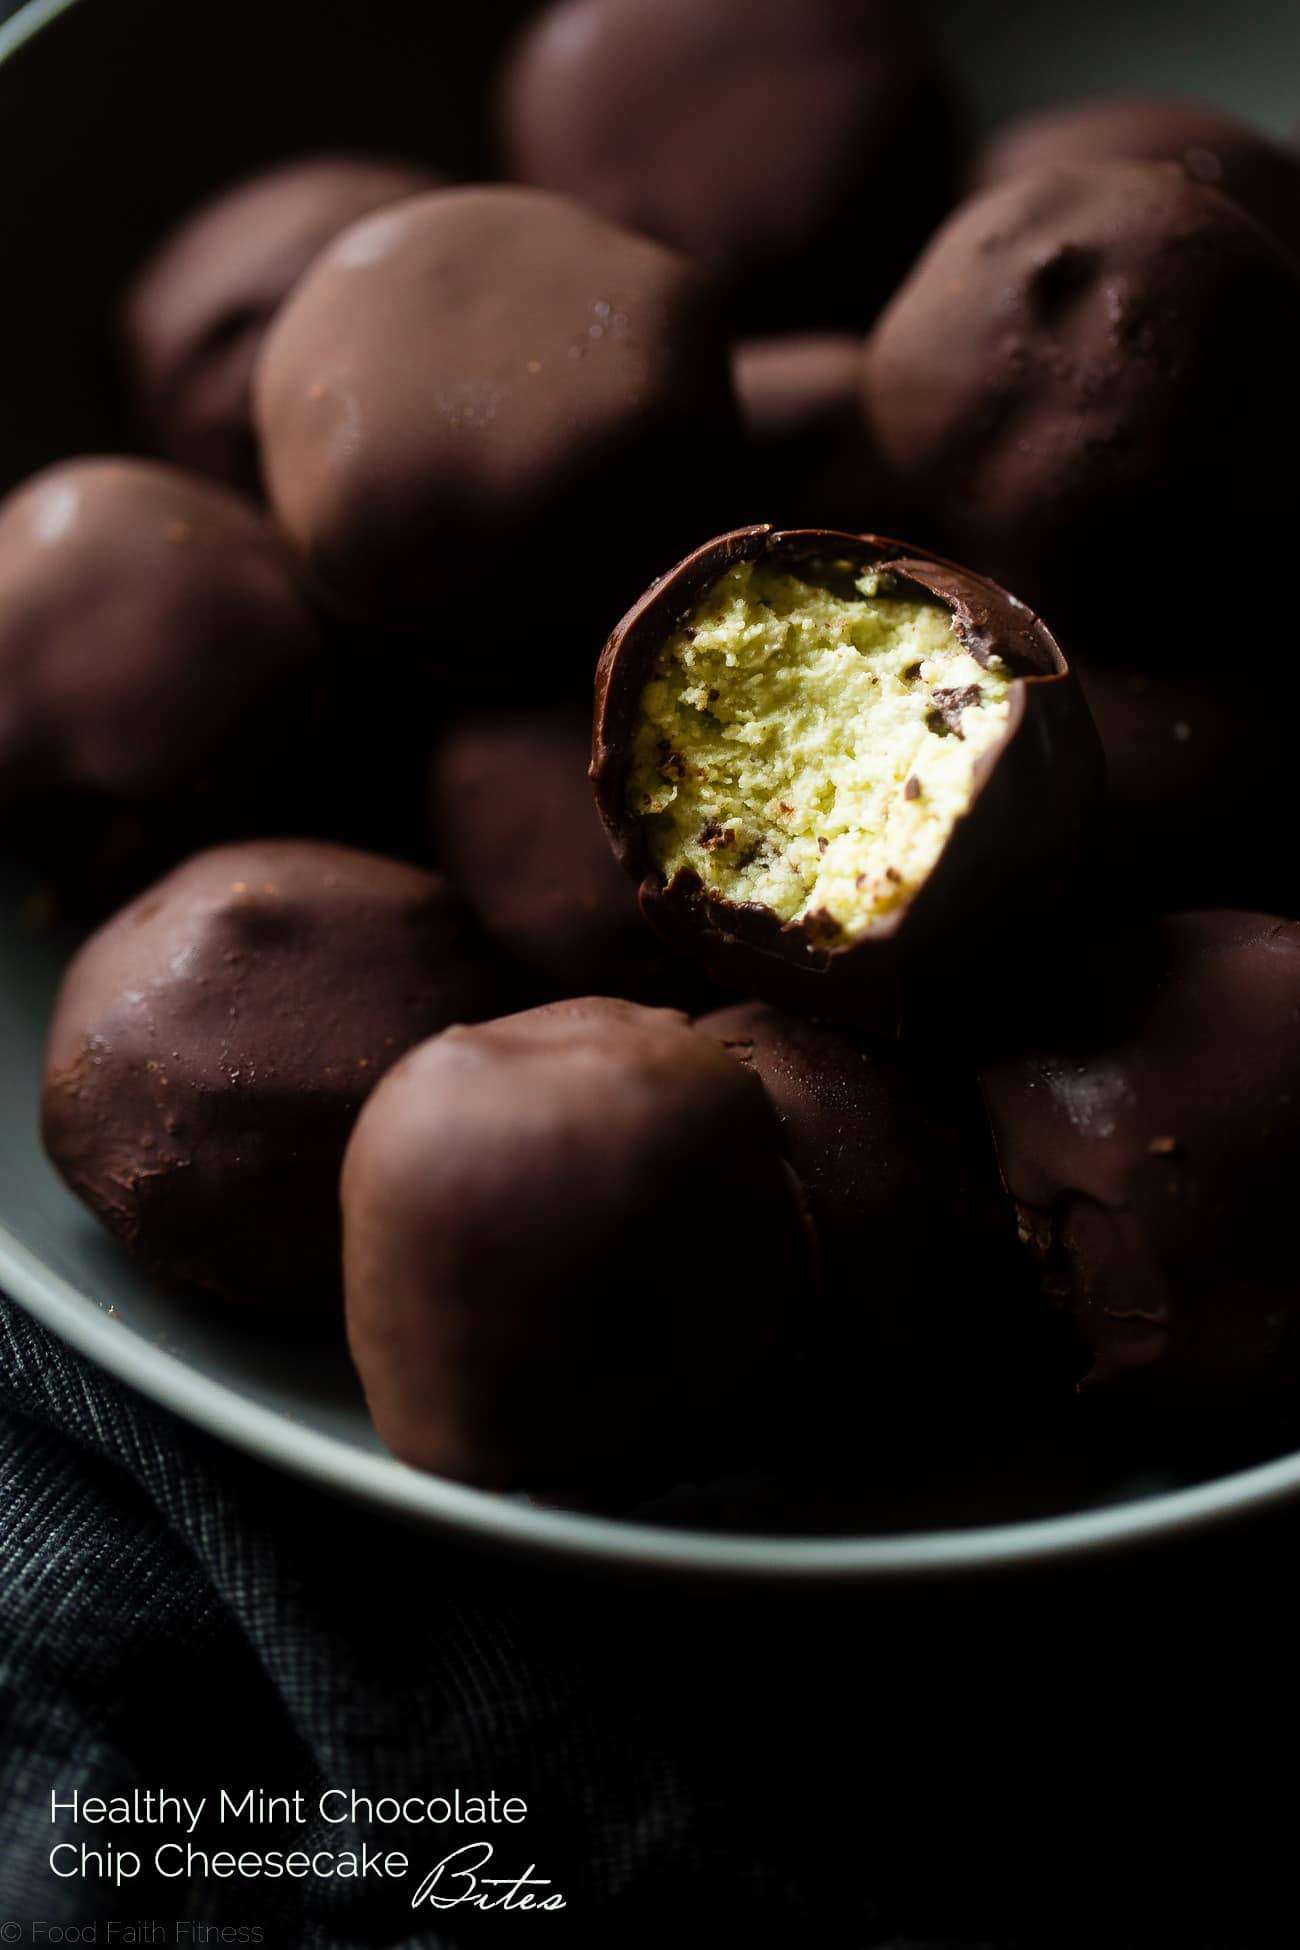 Mint Avocado Cheesecake Truffles - These low carb, protein-packed, creamy cheesecake truffles are covered in chocolate! They're a healthy, gluten free Christmas treat for only 90 calories! | Foodfaithfitness.com | @FoodFaithFit